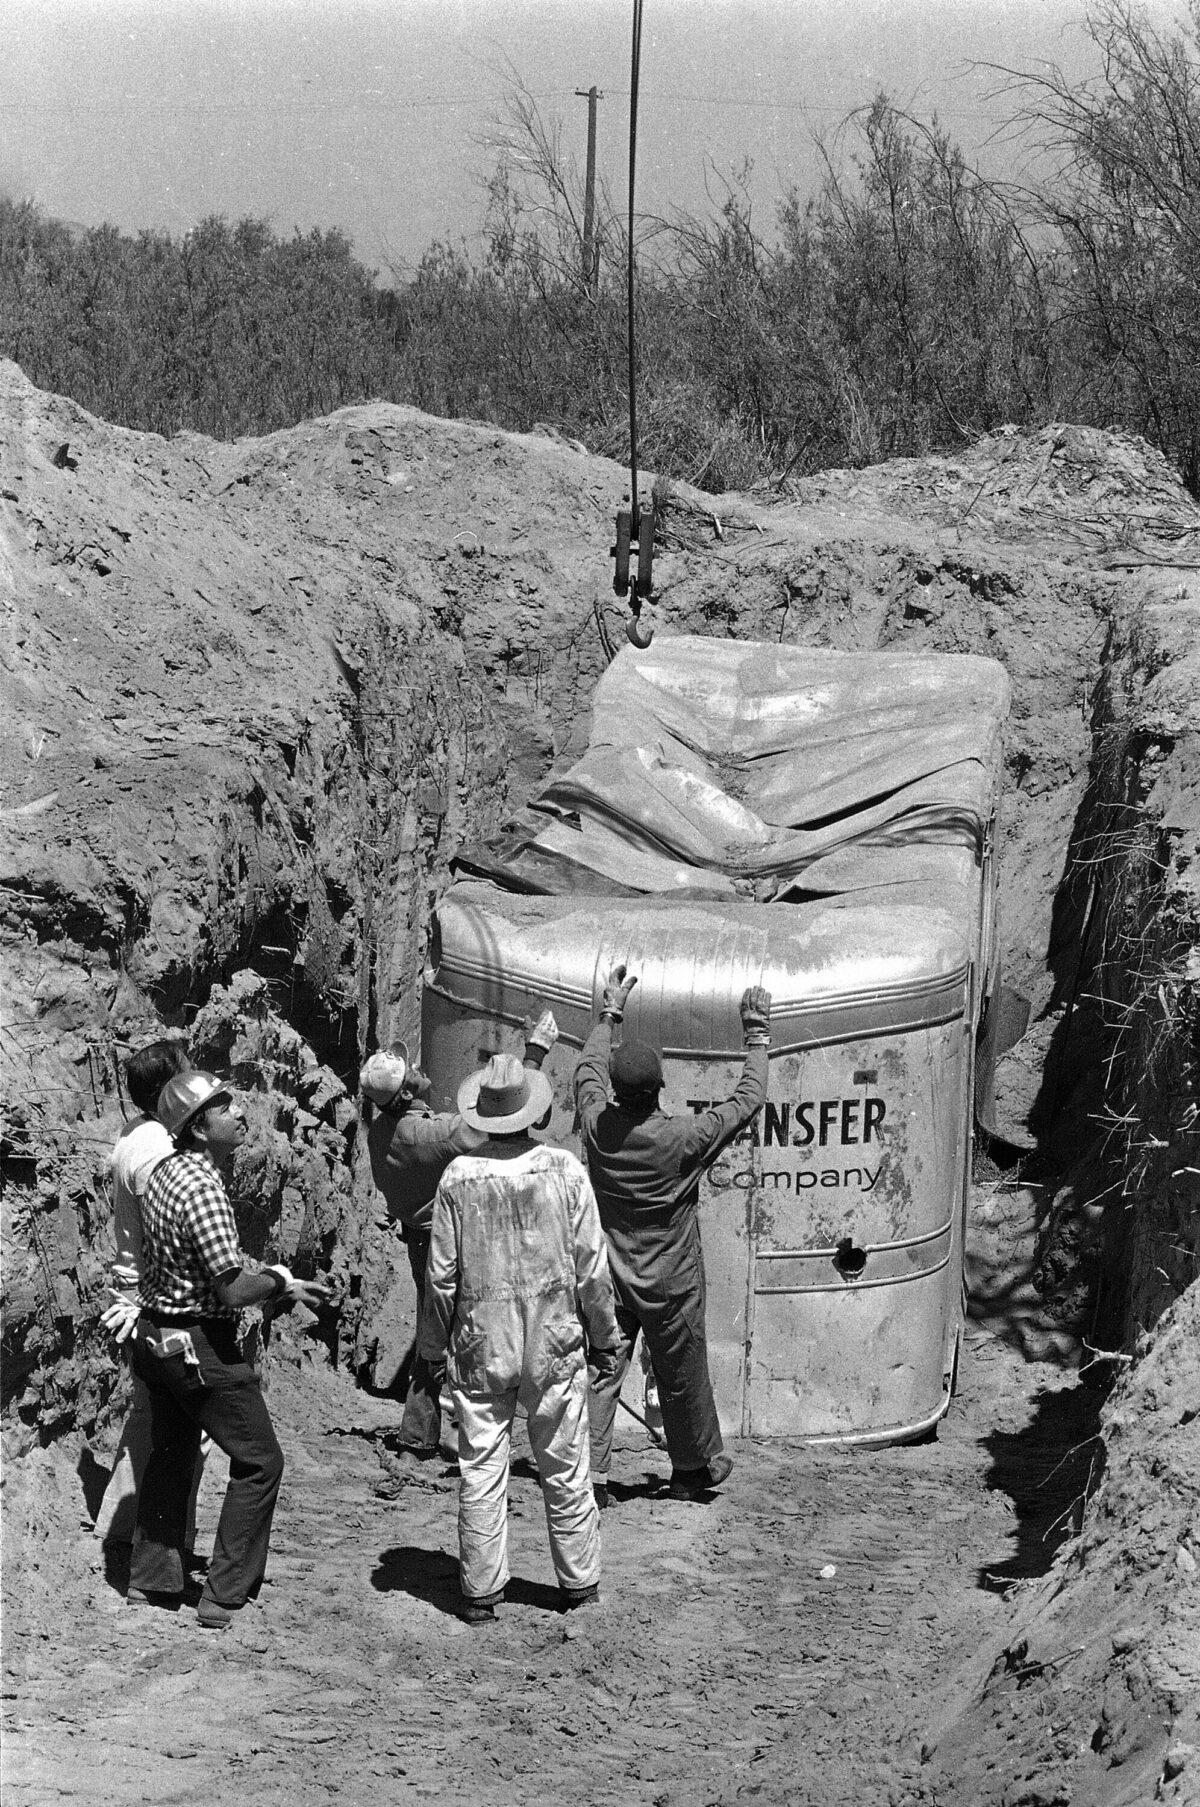 Officials remove a moving van buried at a rock quarry in Livermore, Calif., on July 20, 1976. Twenty-six Chowchilla school children and their bus driver Ed Ray were held captive in the van. (James Palmer/AP Photo)